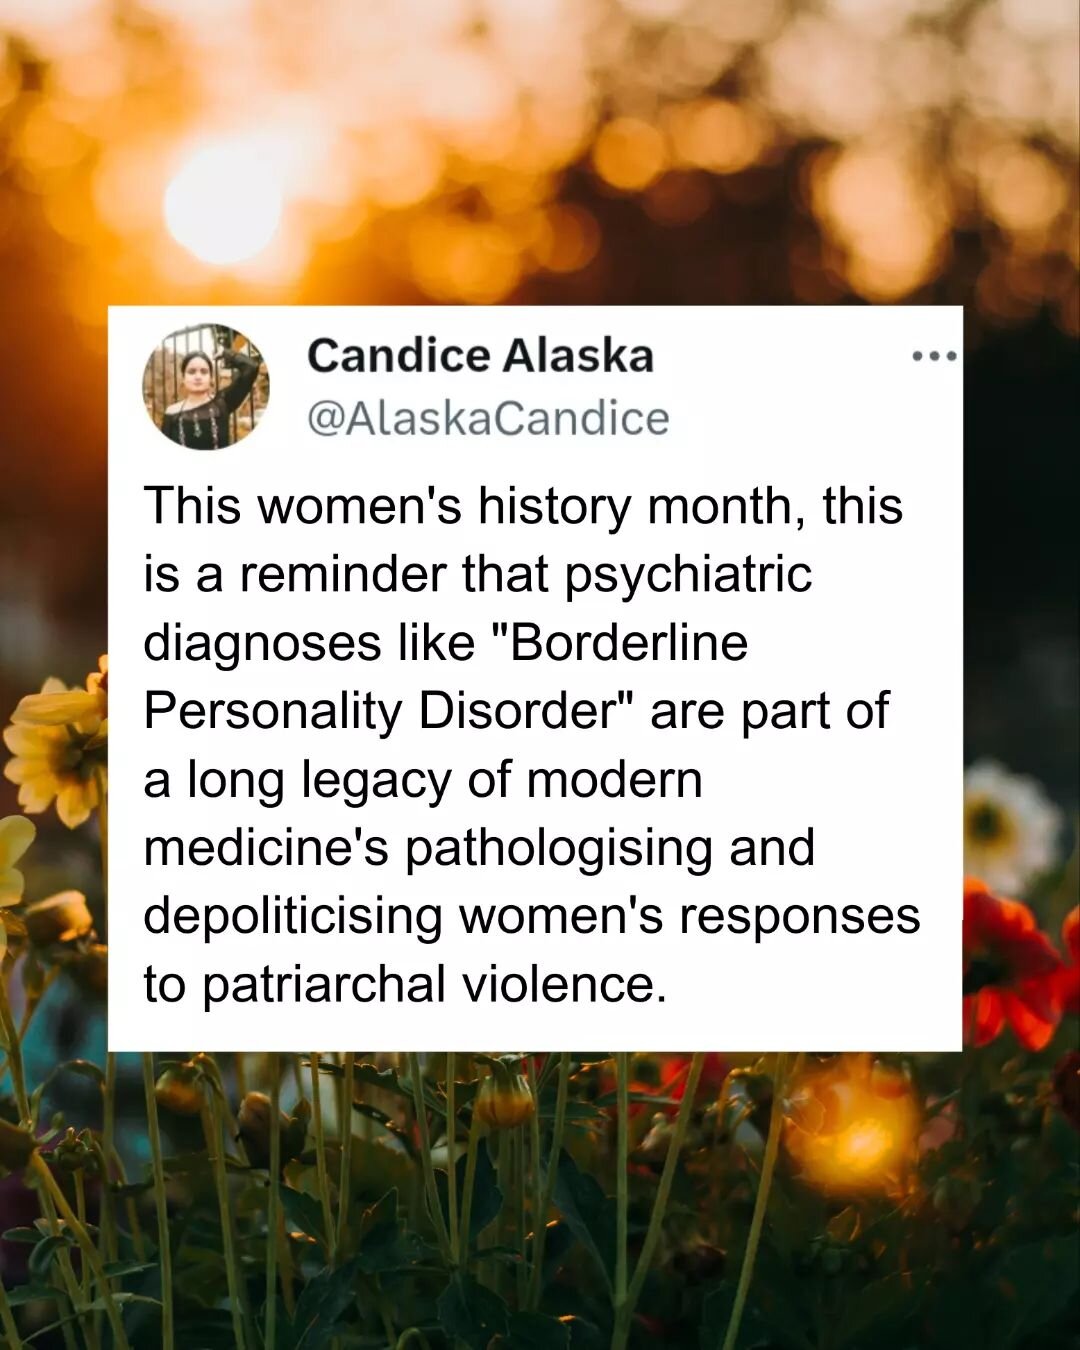 CW abuse, SA. 

It's no coincidence that &quot;Borderline Personality Disorder&quot; is much more frequently diagnosed in women, and that many people with this diagnosis are survivors of abuse and sexual violence. Not only does the diagnosis disguise